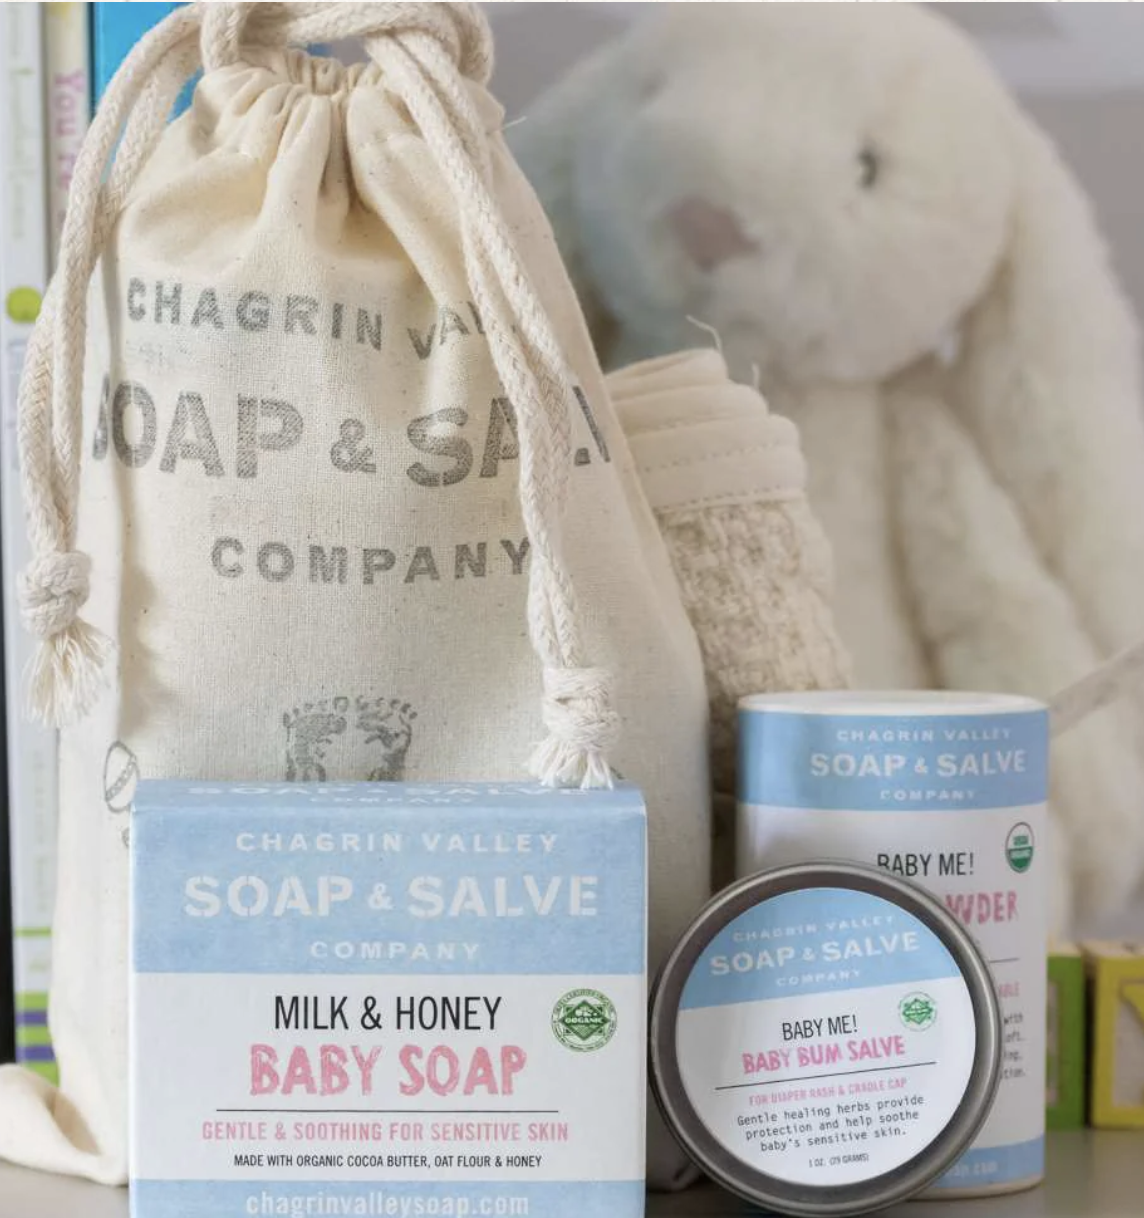 A chagrin valley soap and salve bundle set